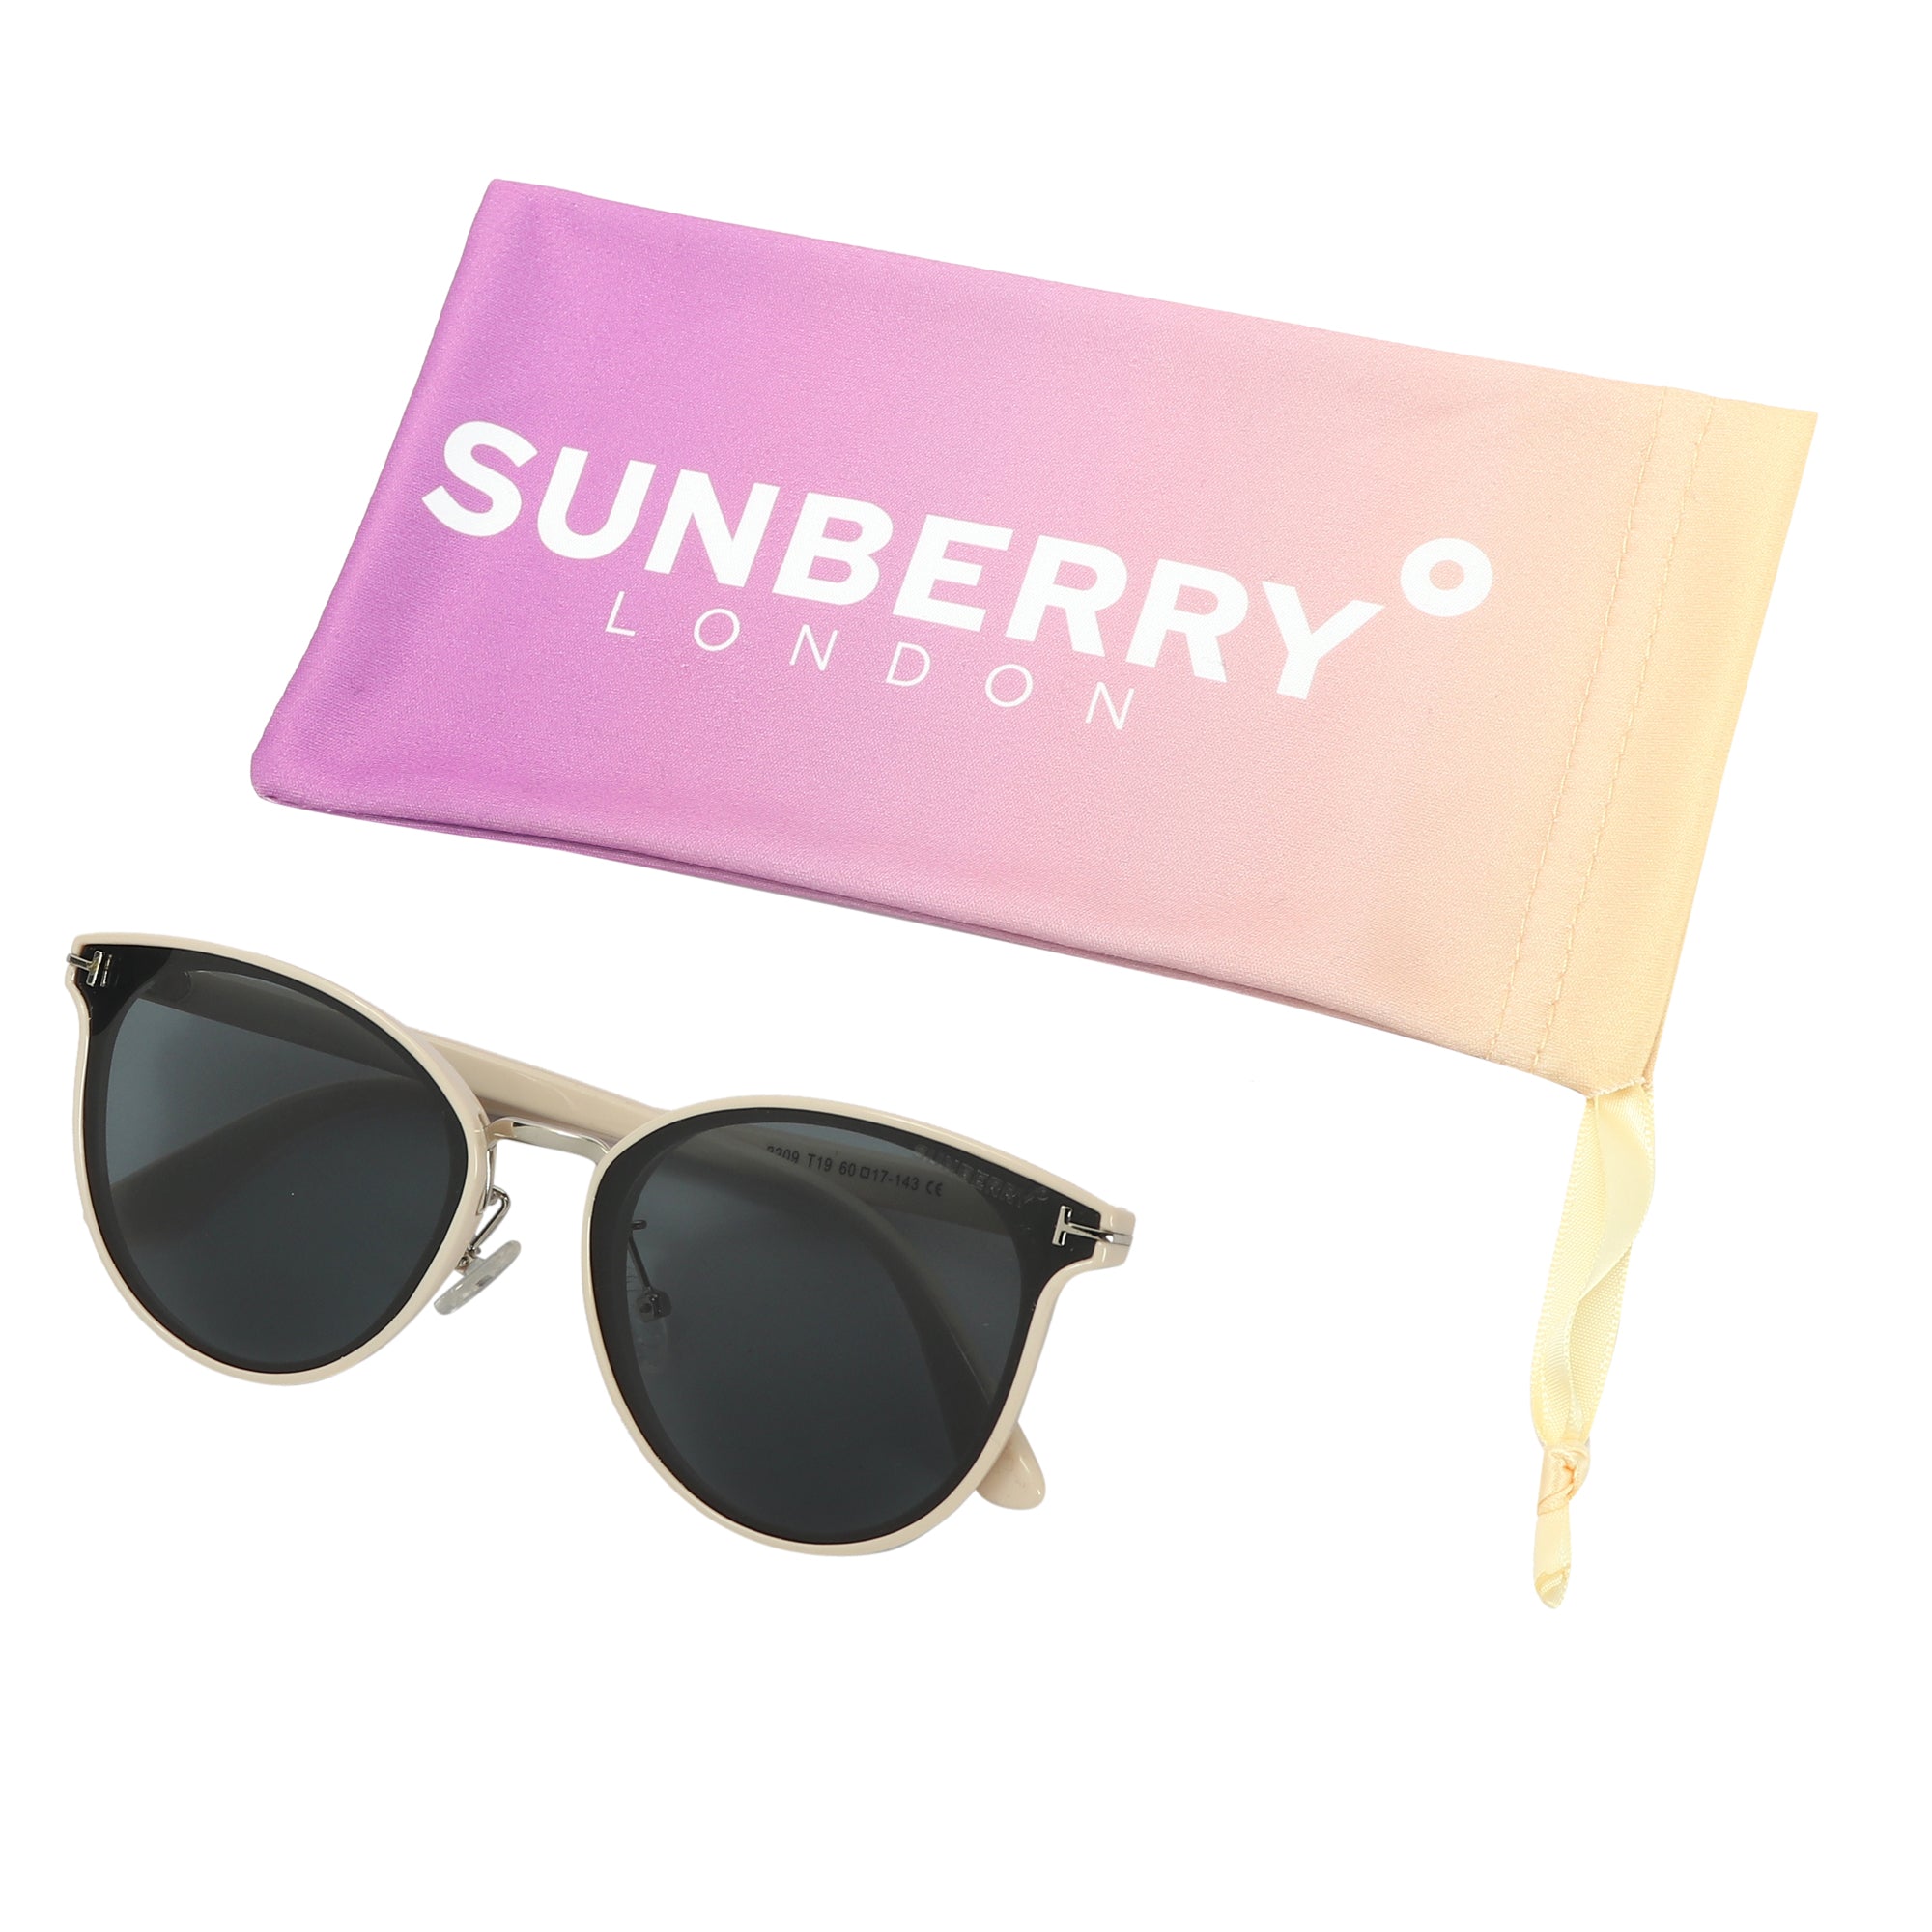 HL Sunberry Cash Machine Glasses With Free Case